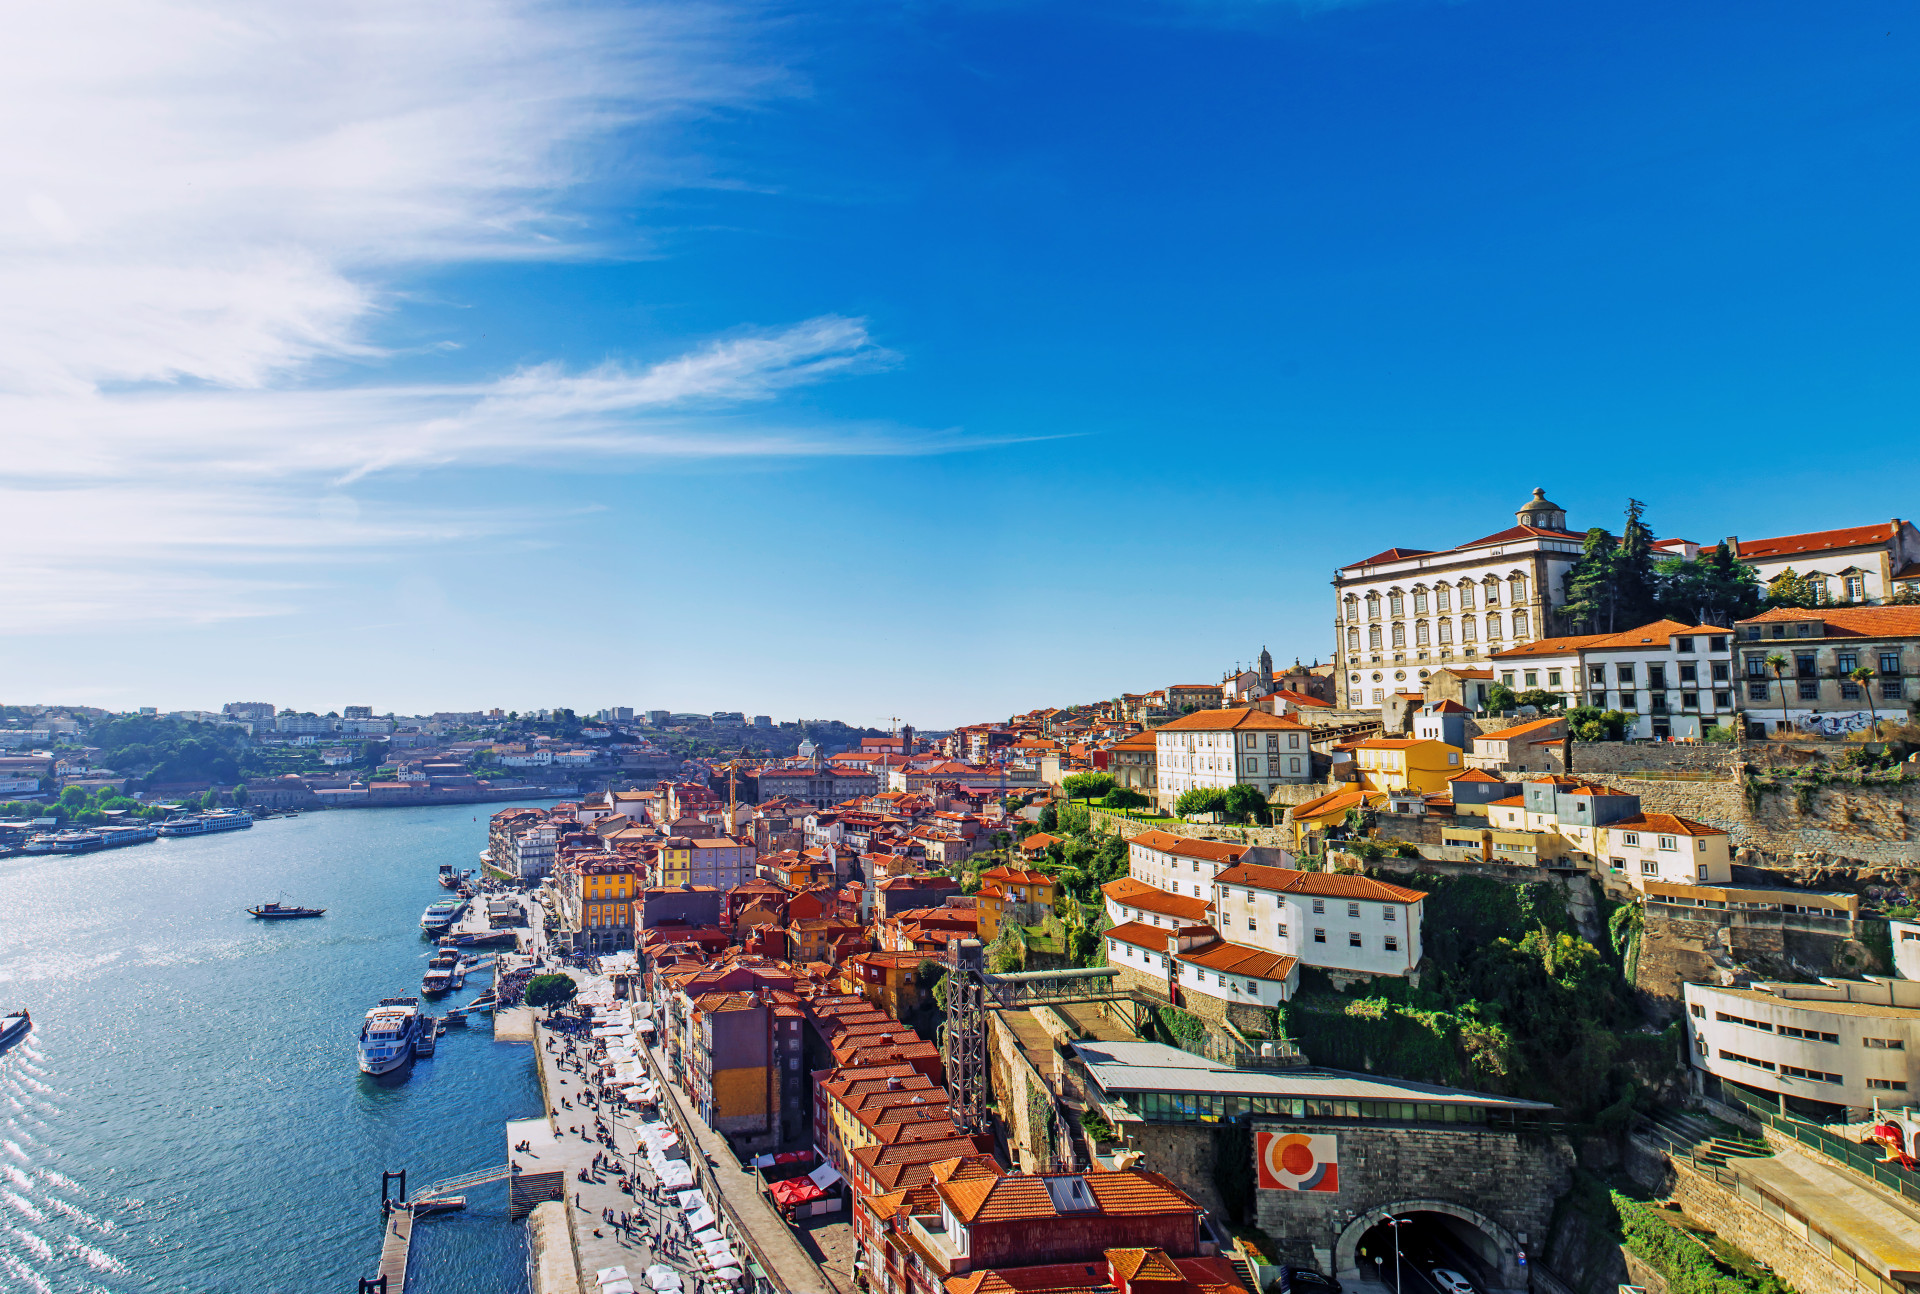 Porto is now one of the trendiest cities in Europe. That's not just down to its cultural heritage, it's easily accessible and has a rich wine and gastronomic heritage. <p>You may also like:<a href="https://www.starsinsider.com/n/493286?utm_source=msn.com&utm_medium=display&utm_campaign=referral_description&utm_content=292997v1en-us"> Mythological figures similar to Jesus</a></p>